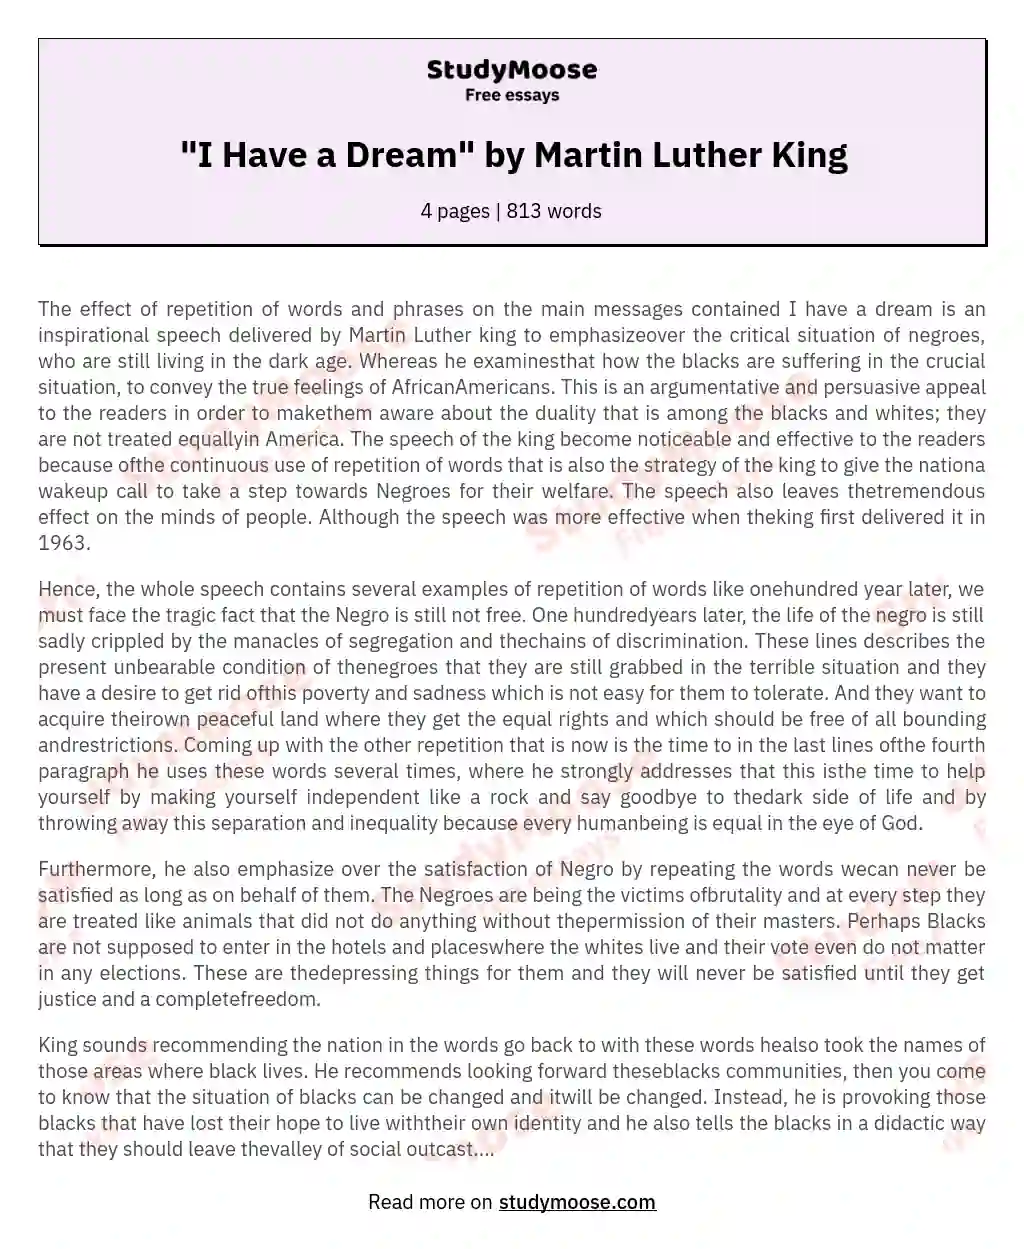 "I Have a Dream" by Martin Luther King essay